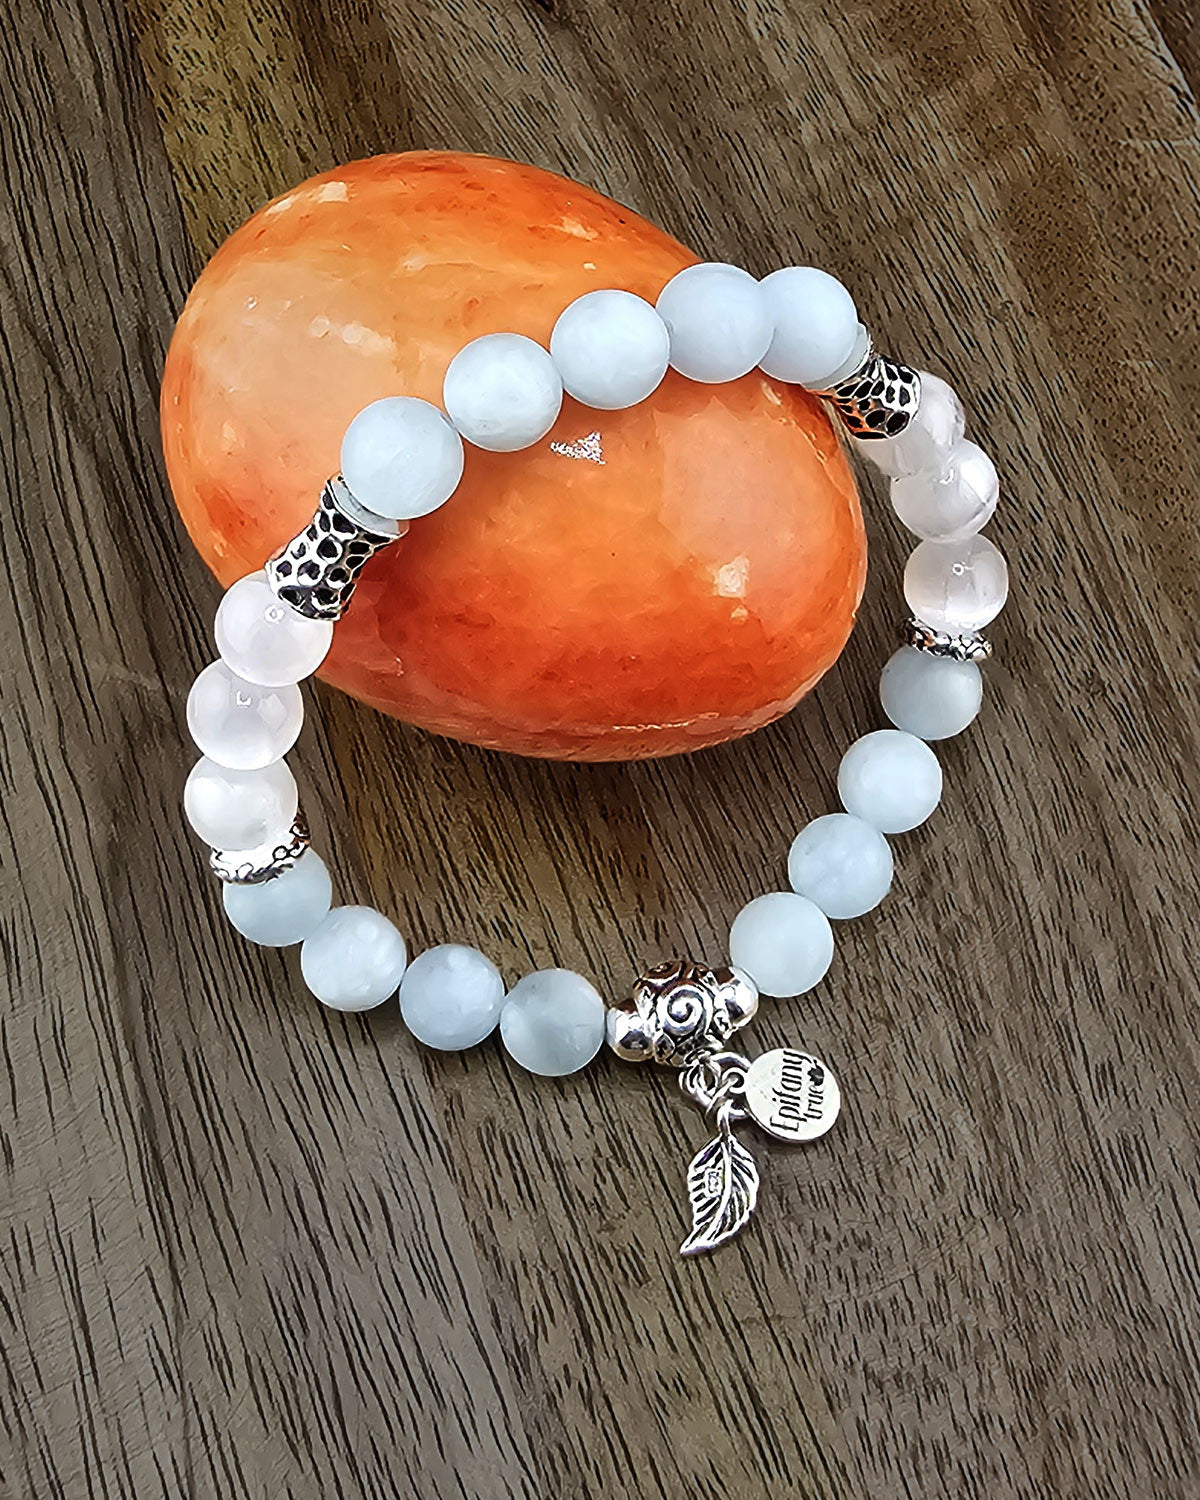 Pure Calm Healing Intention Bracelet with Natural Aquamarine, Selenite and 925 Sterling Silver 7 inch